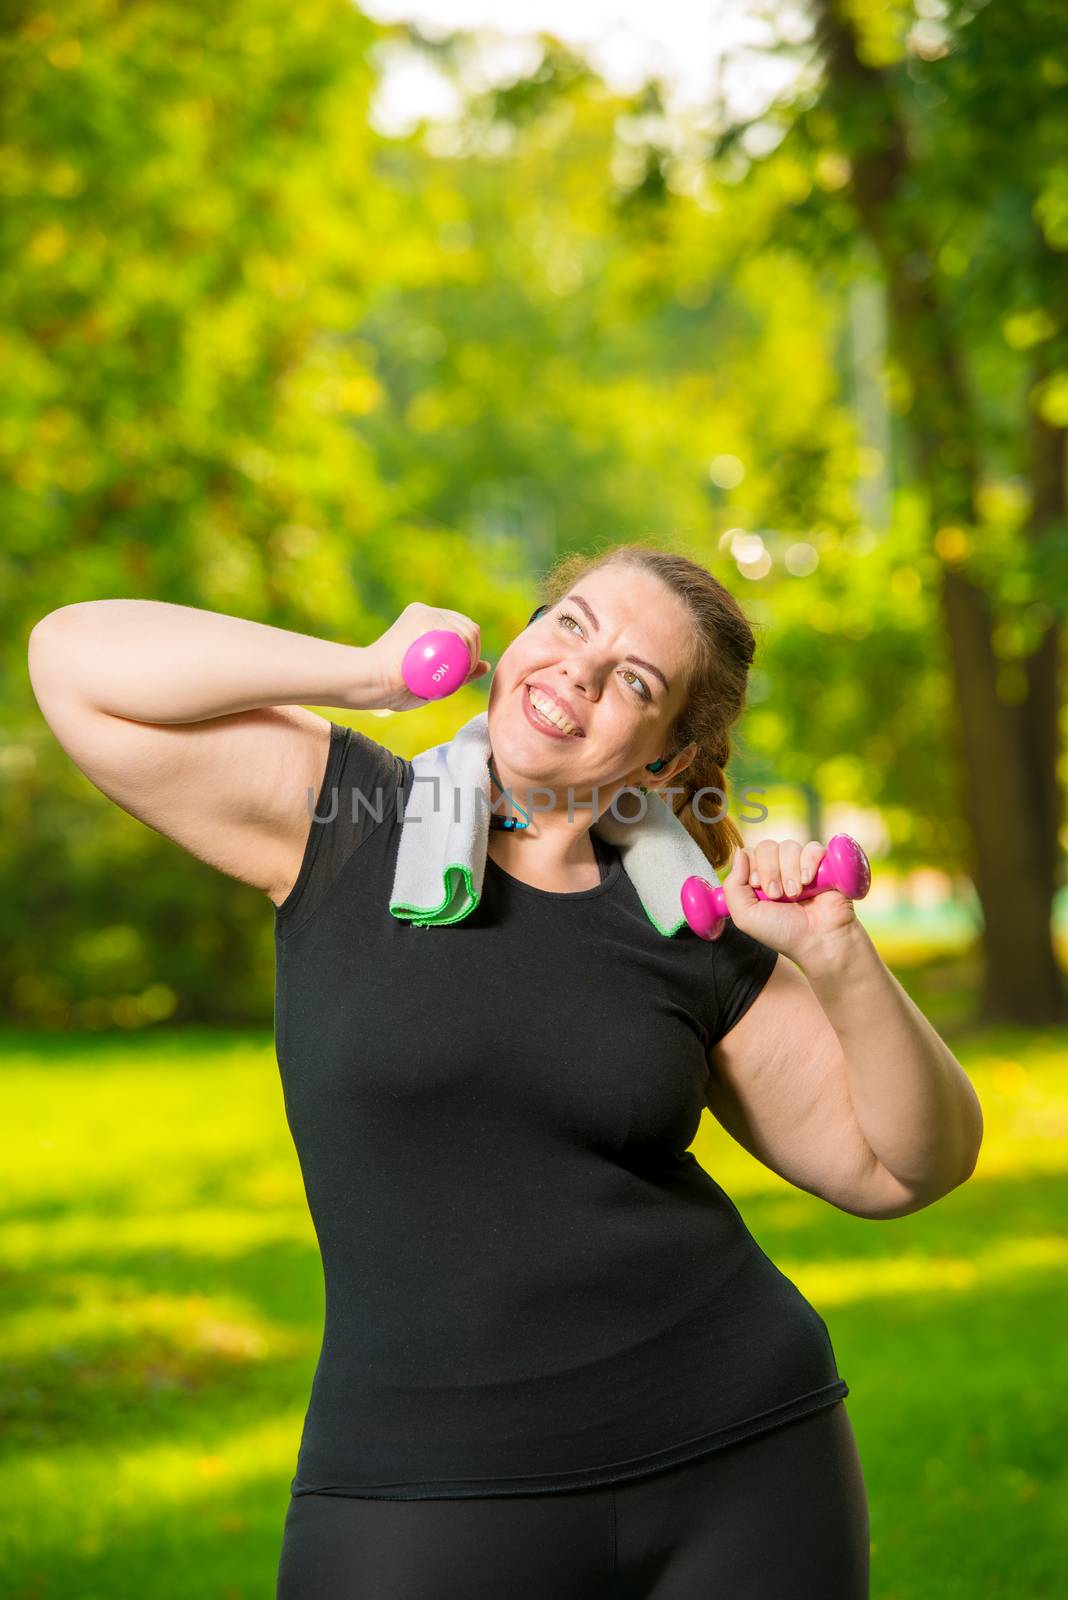 Vertical portrait of a happy plus-size model with dumbbells duri by kosmsos111